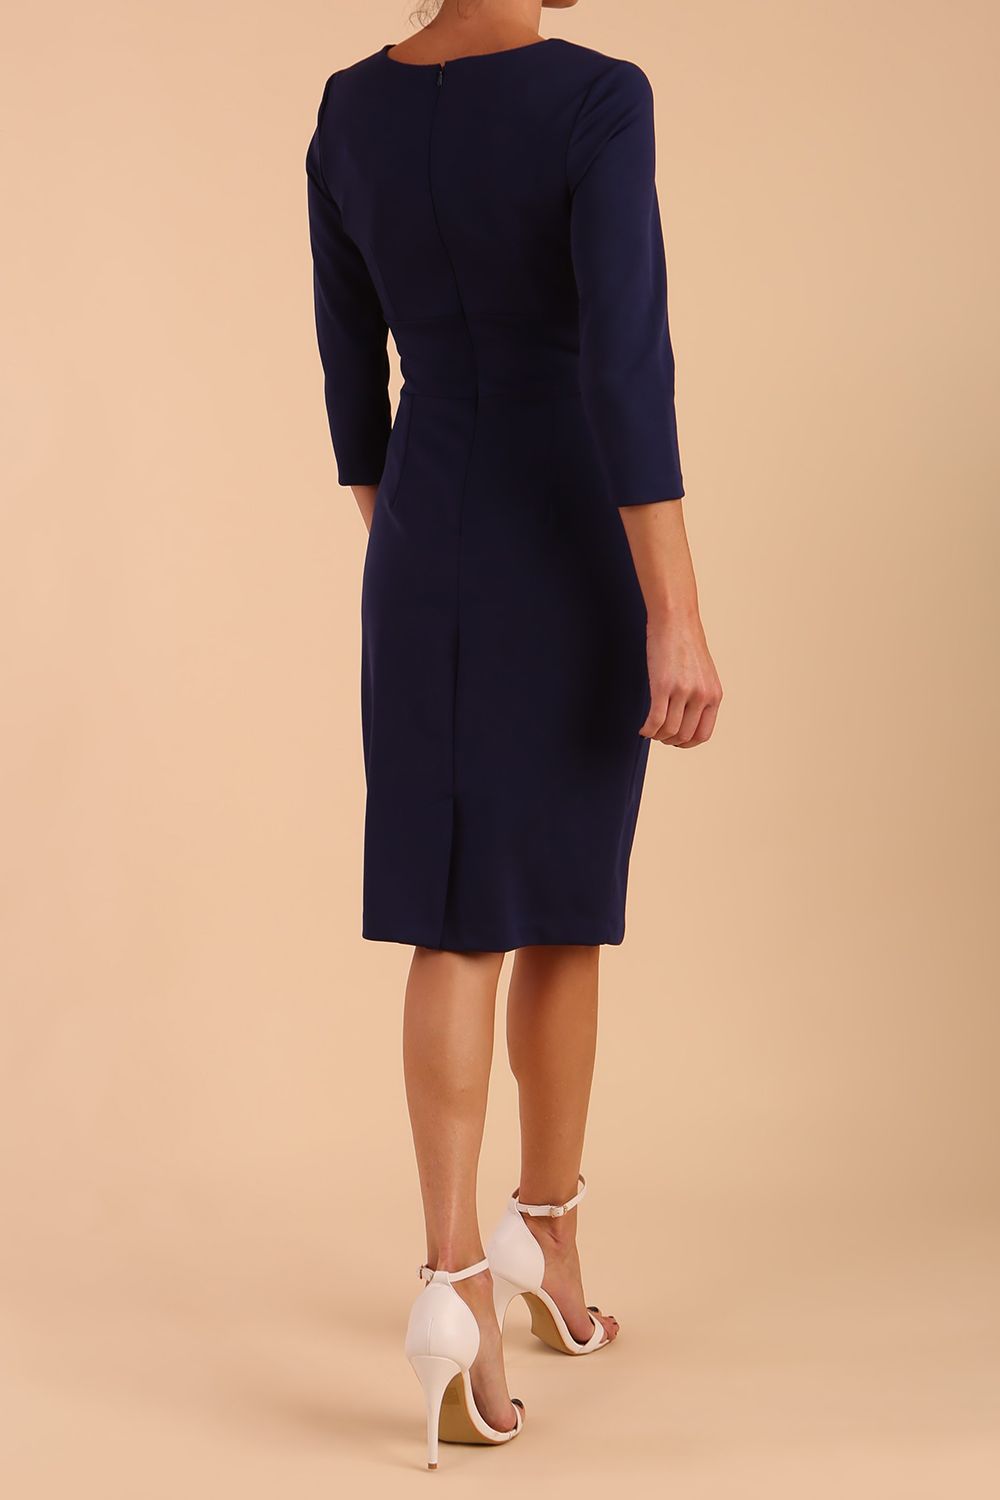 model wearing diva catwalk donna pencil dress with wide band and sleeves and rounded neckline with low split in navy blue colour back